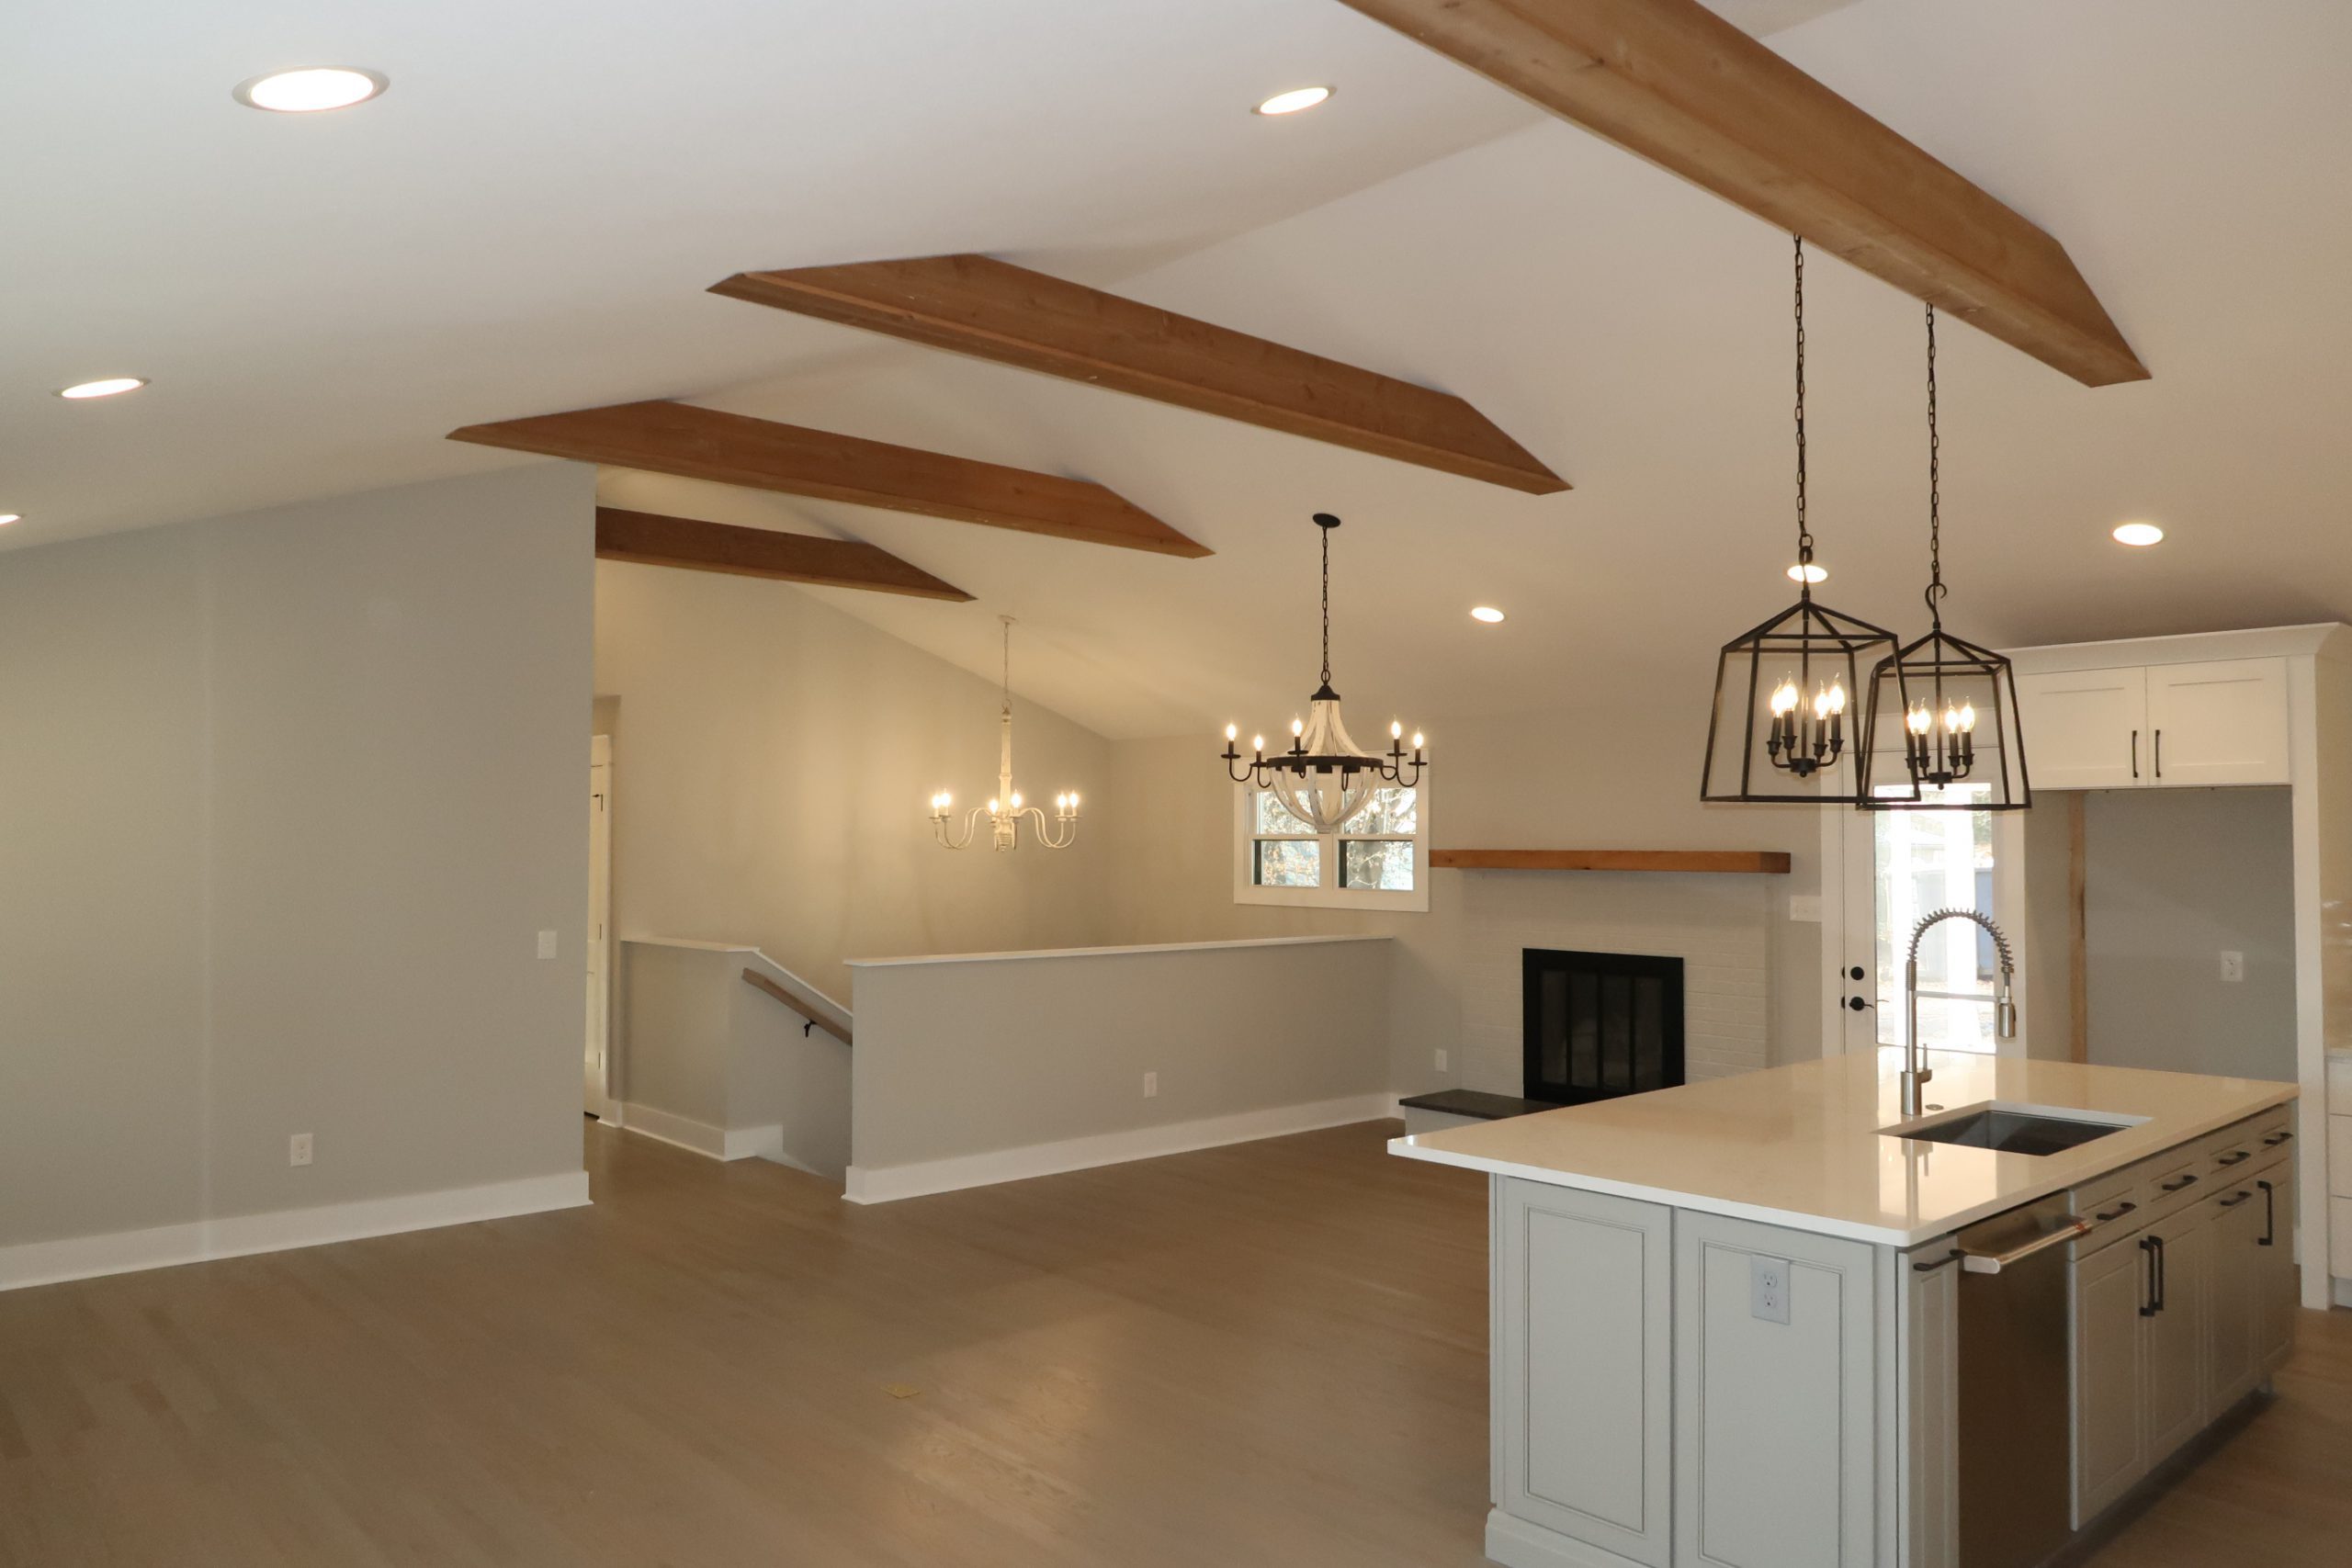 kitchen remodeling knoxville tn